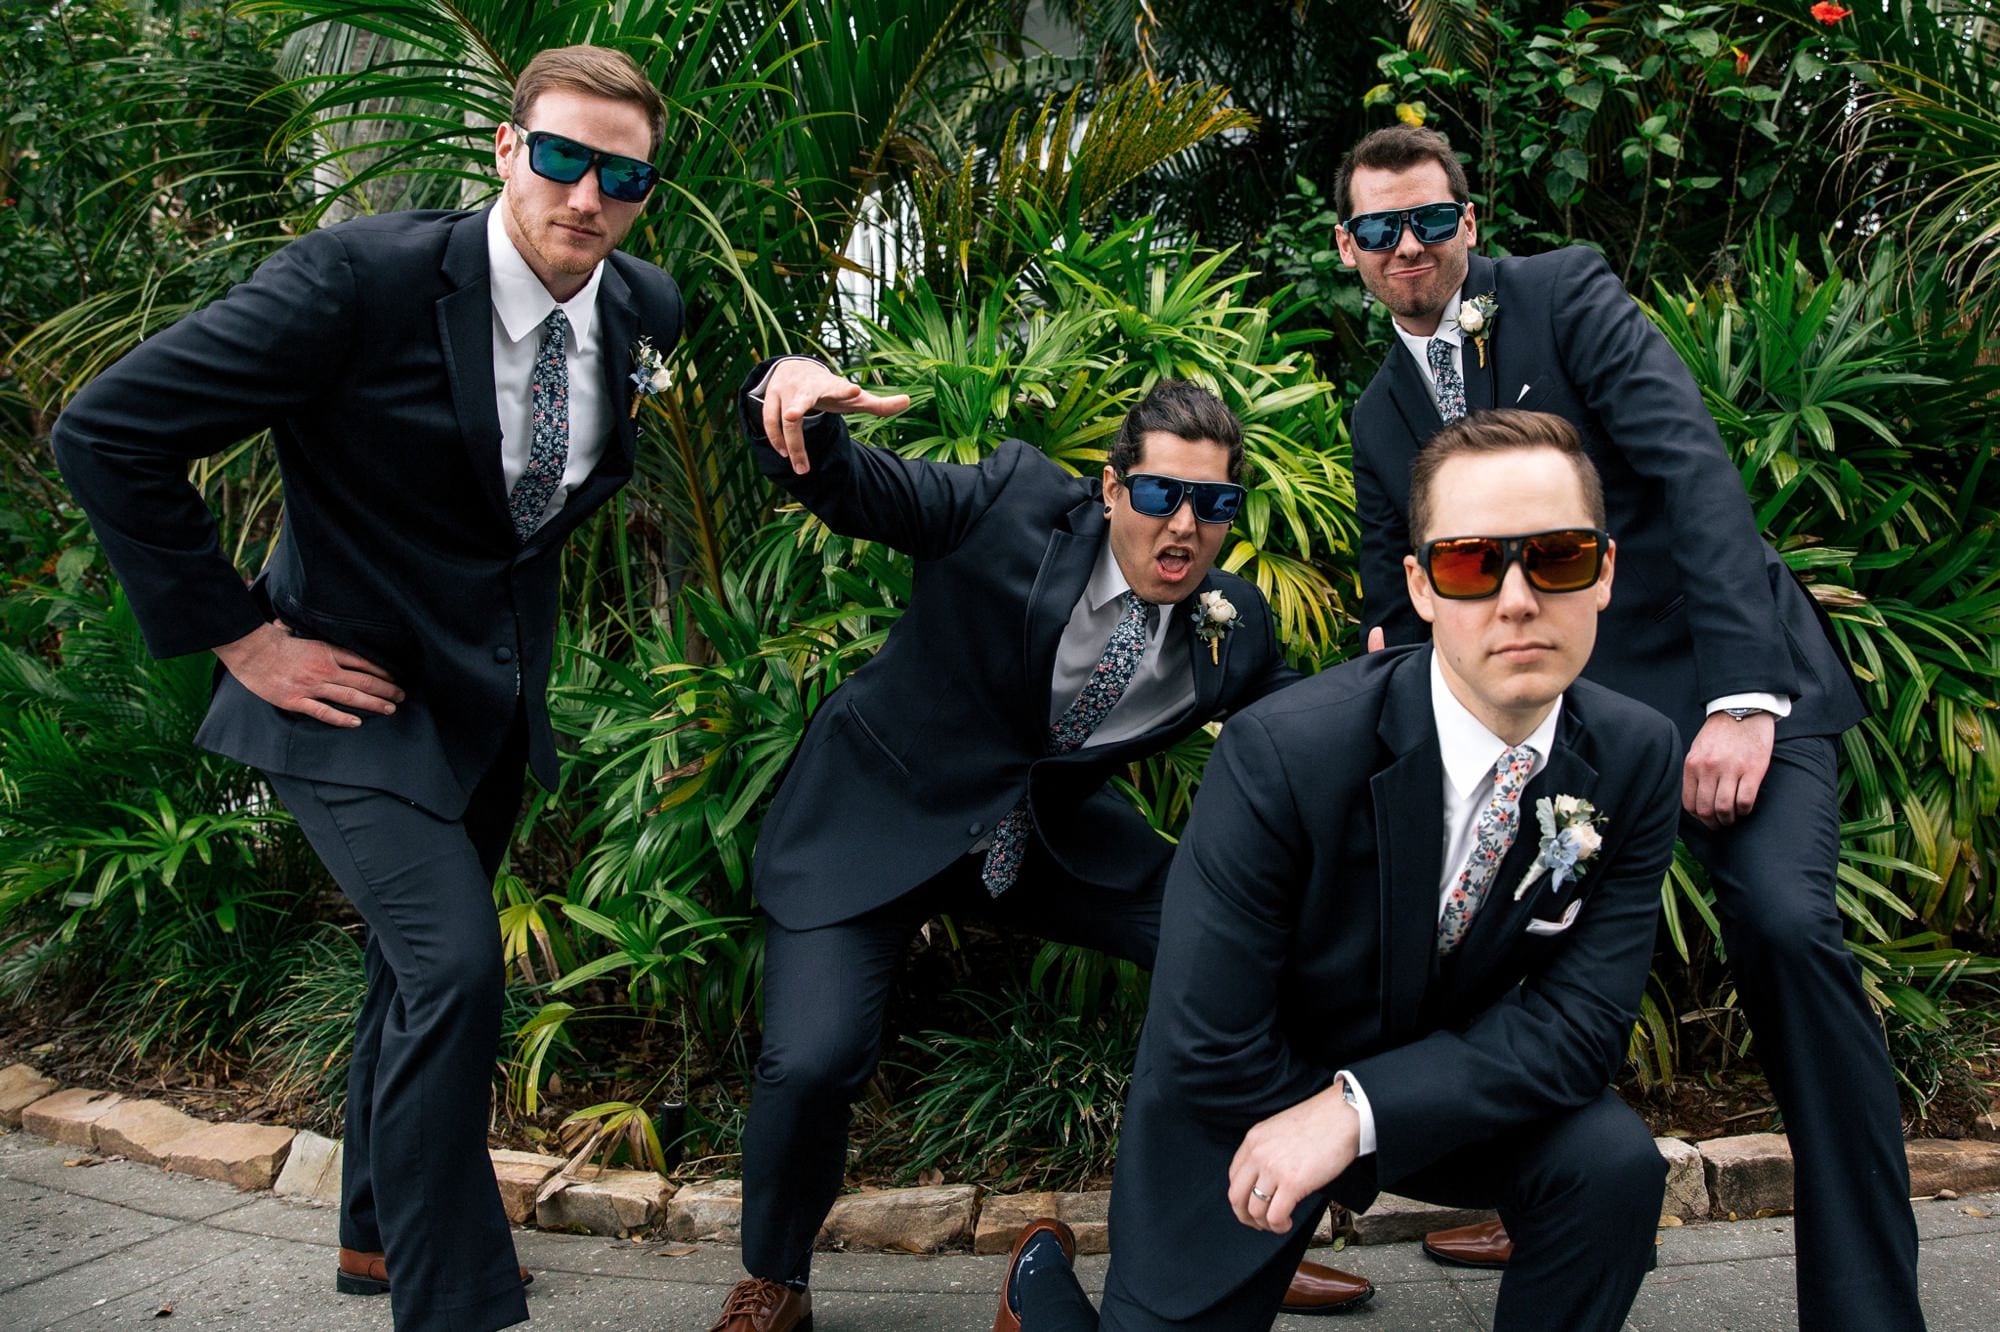 silly wedding party photo